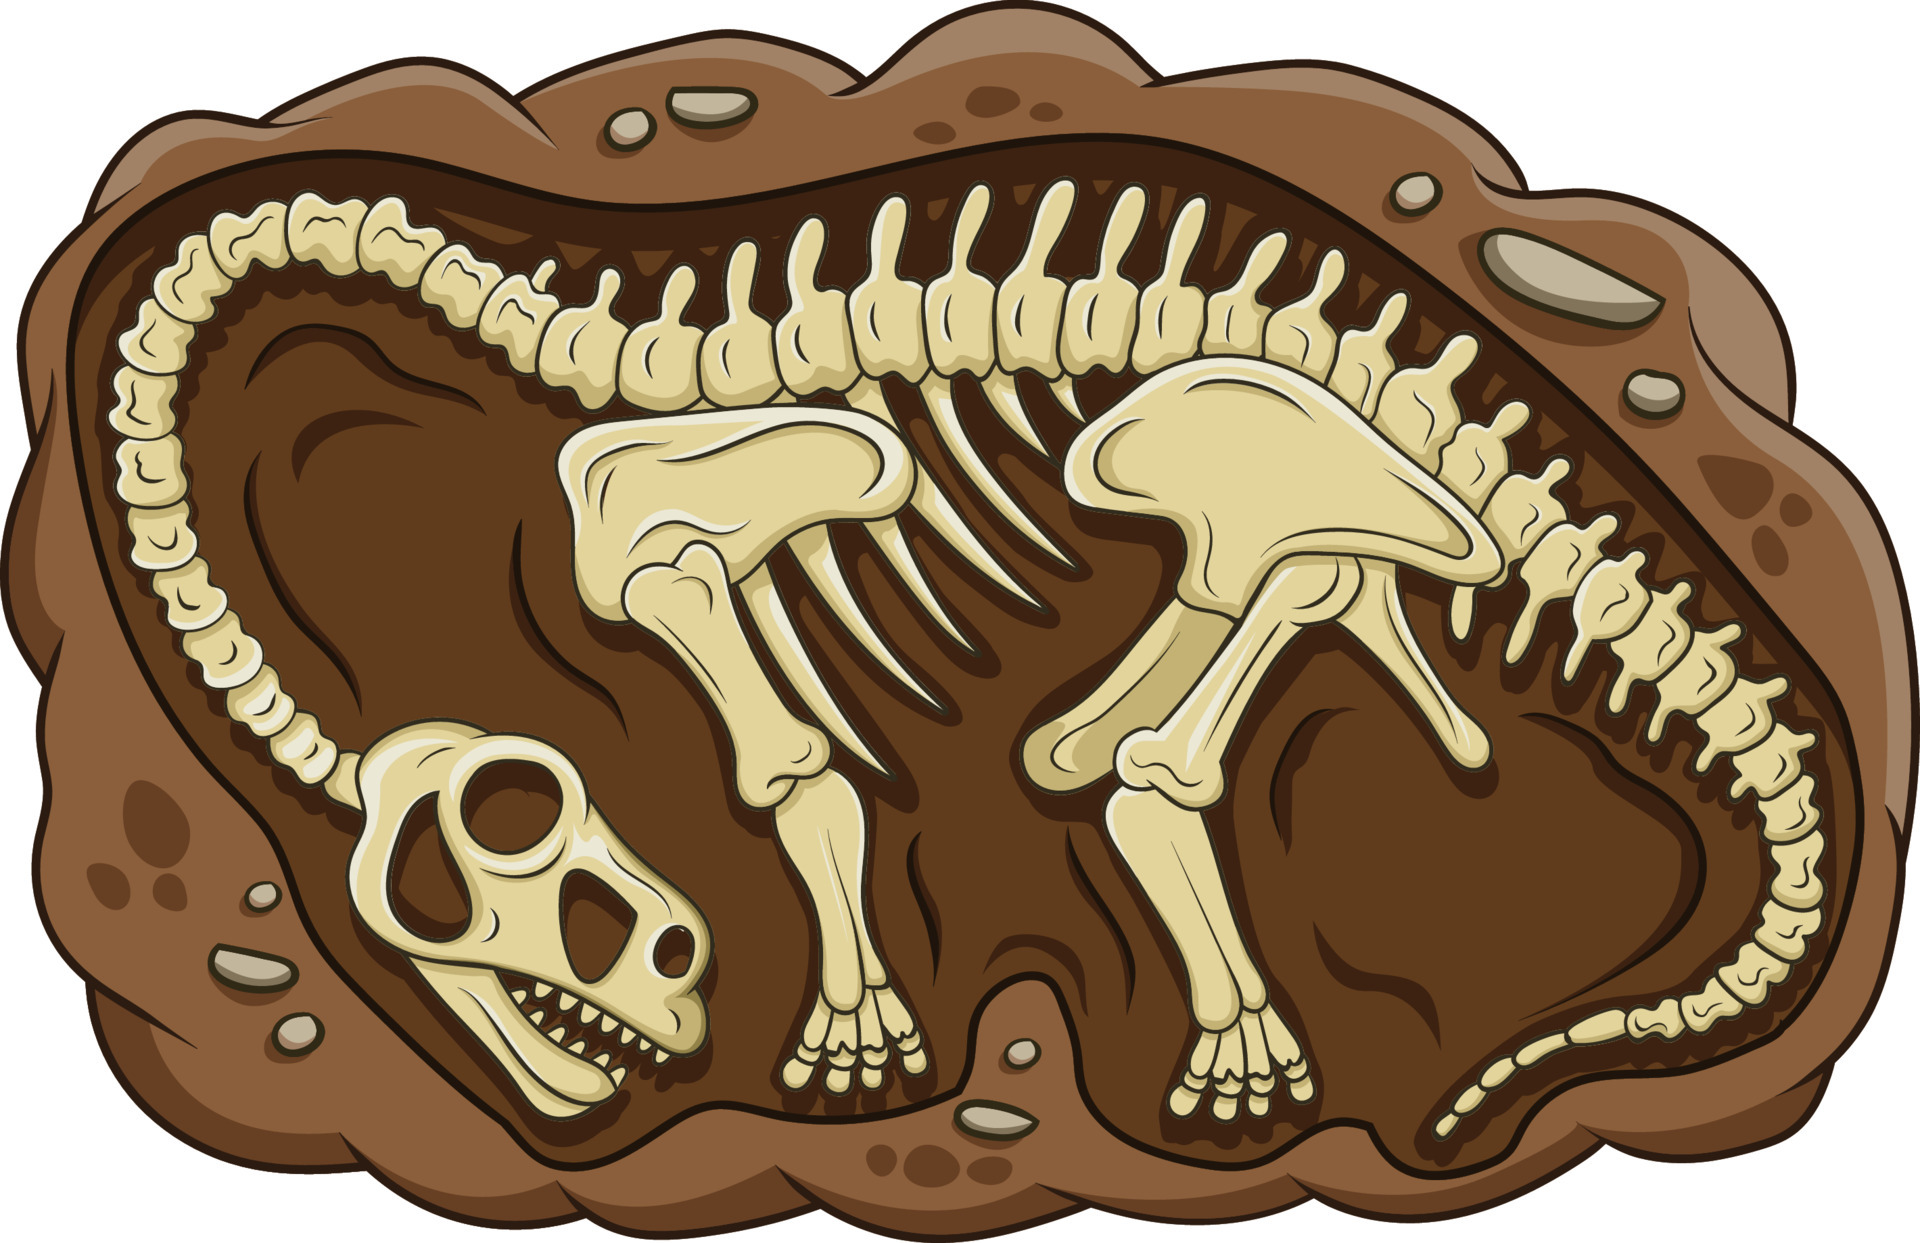 Dinosaur Fossil Vector Art, Icons, and Graphics for Free Download